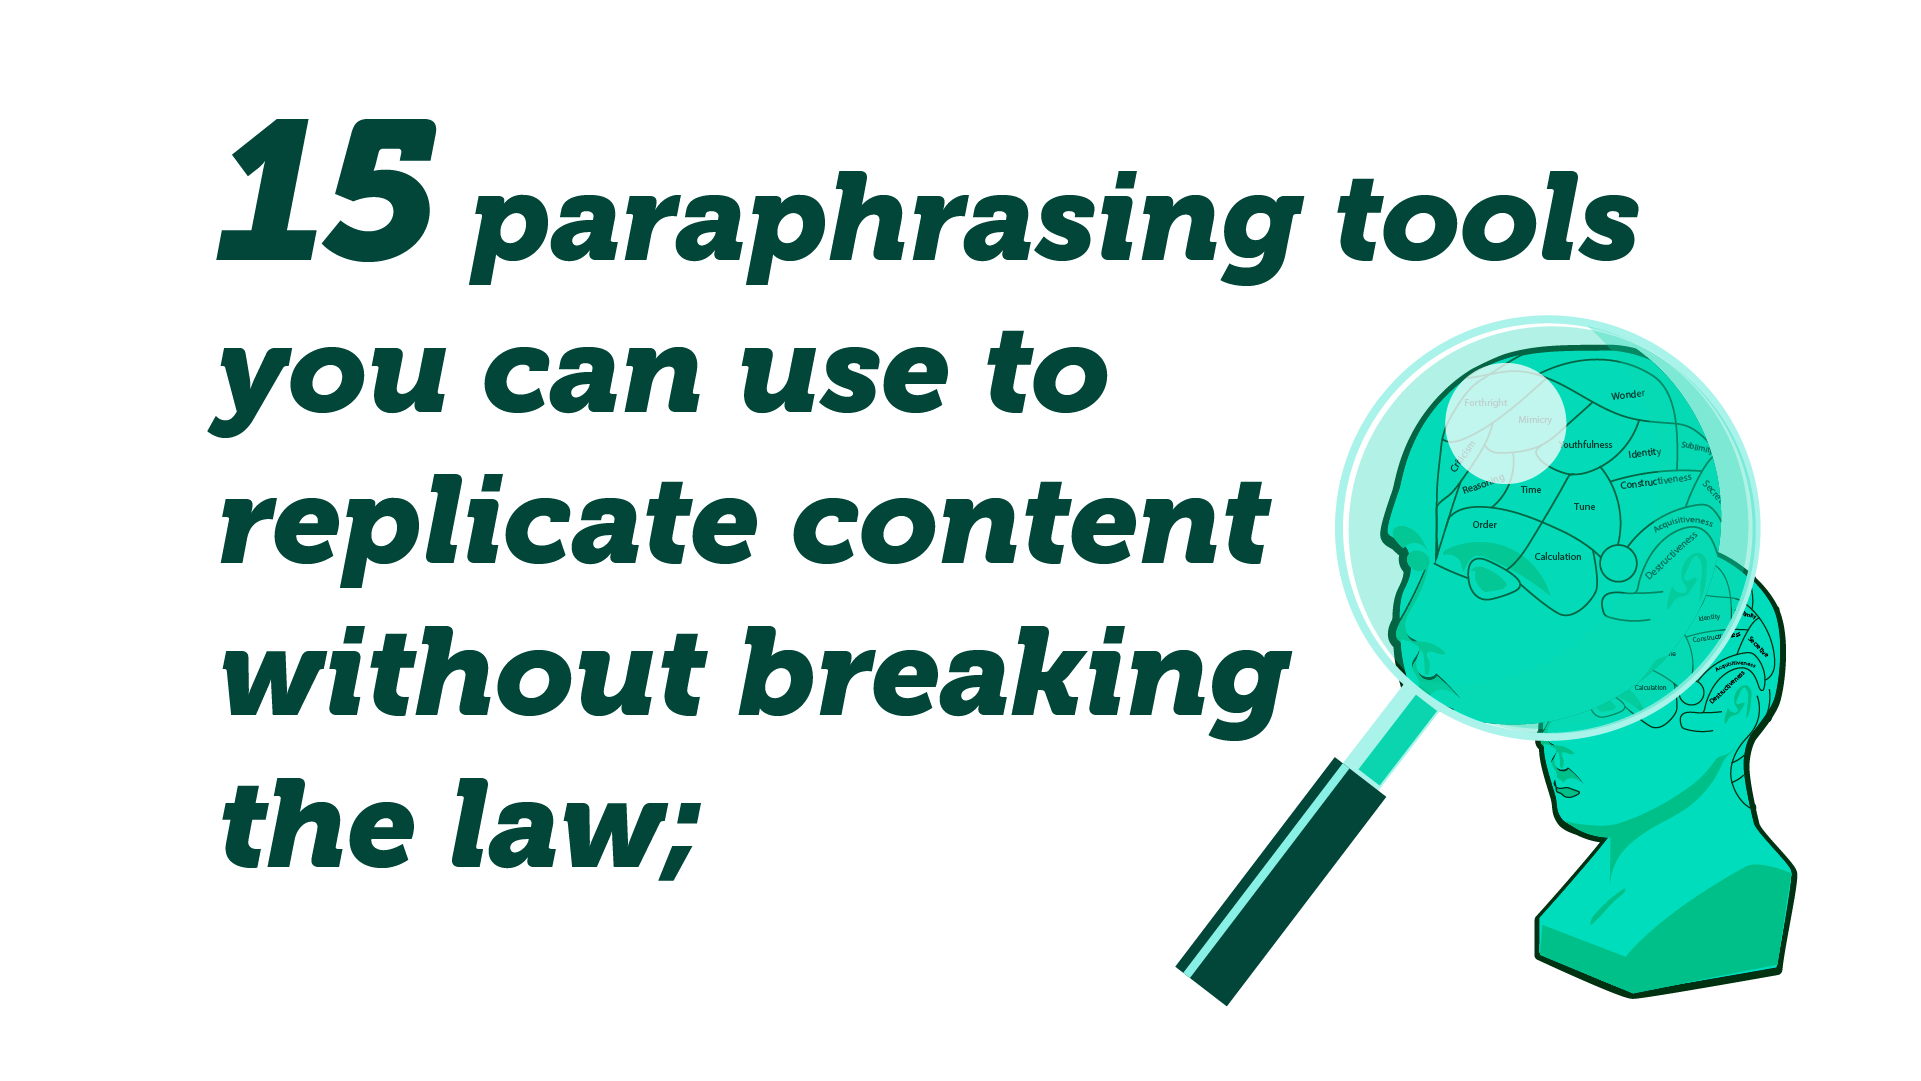 Quote:15 paraphrasing tools you can use to replicate content without breaking the law.